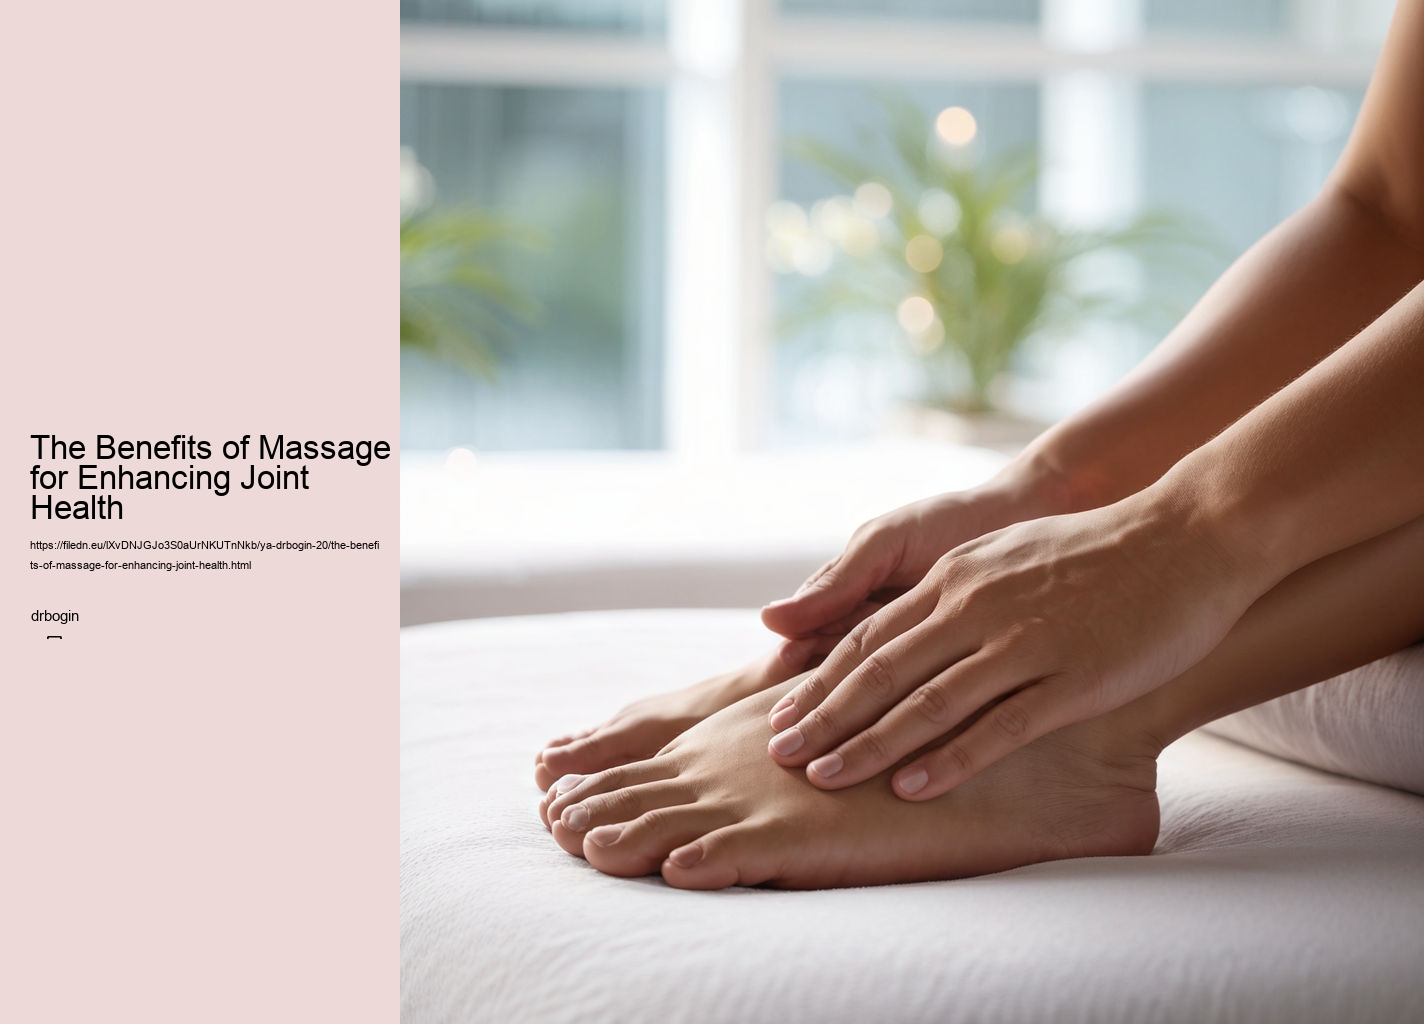 The Benefits of Massage for Enhancing Joint Health